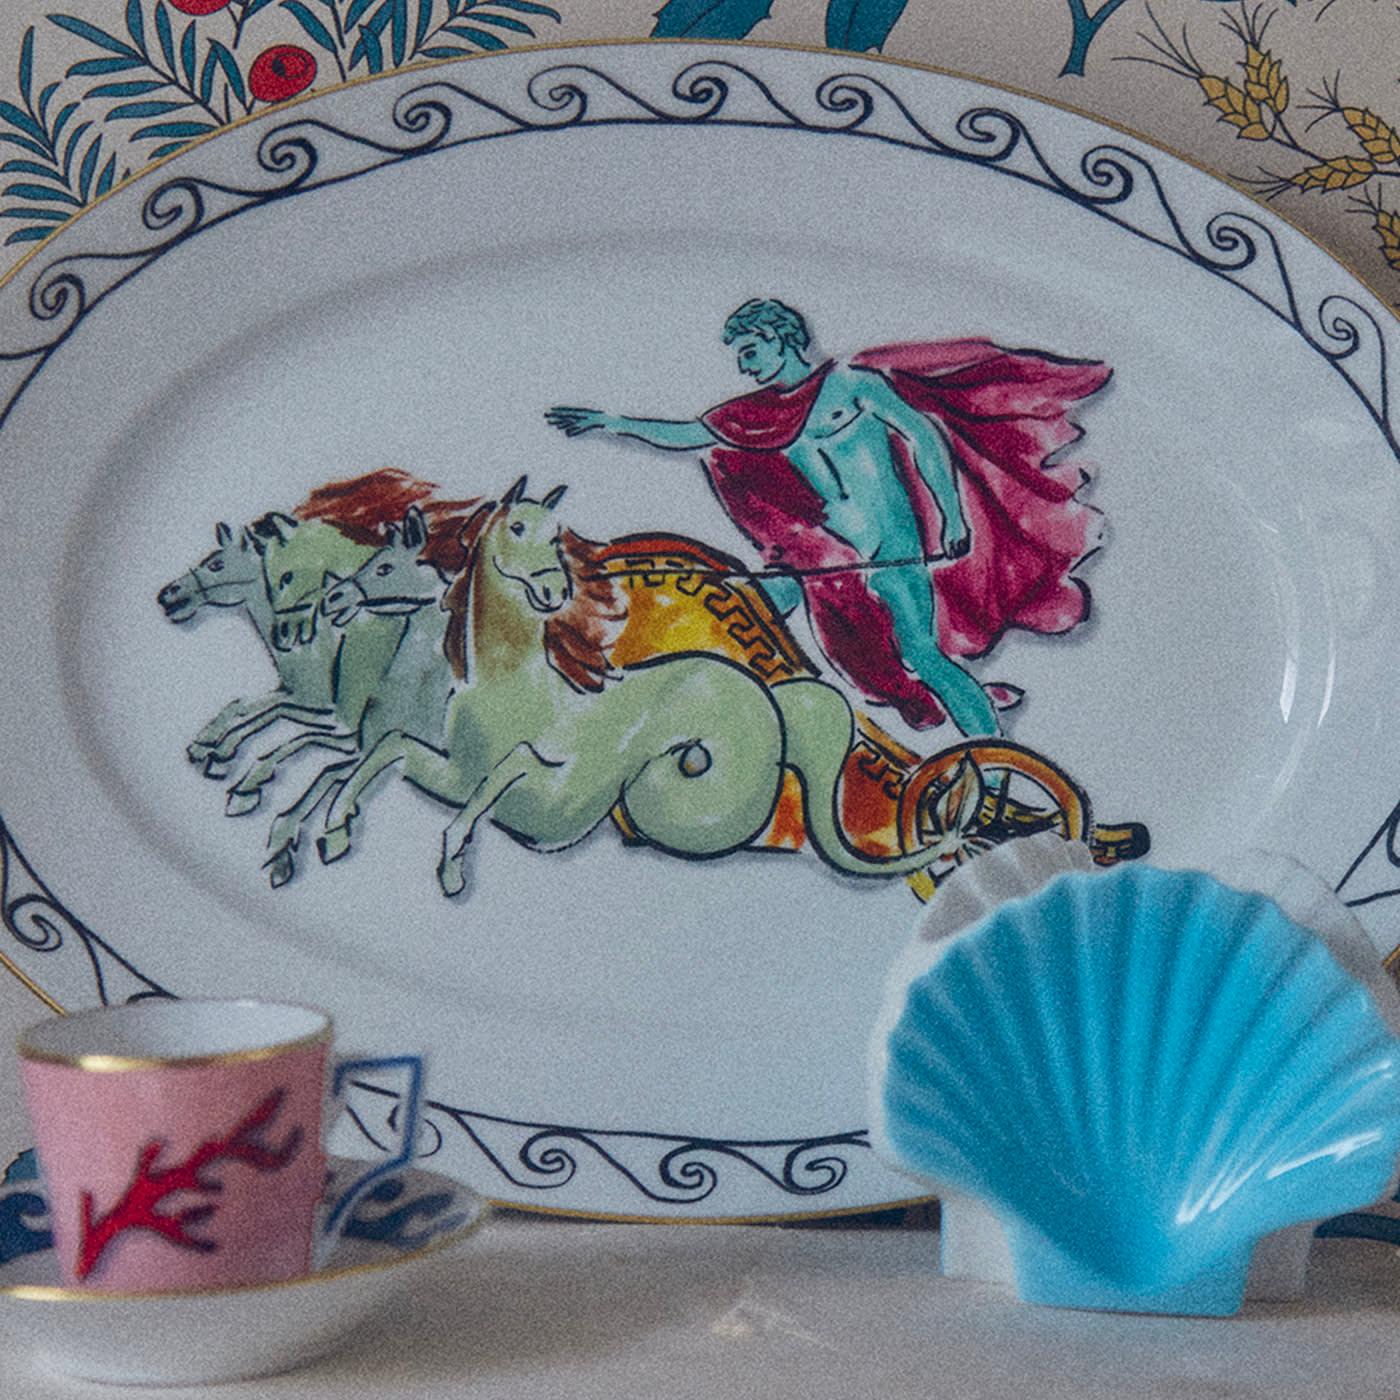 The ancient Roman god of the sea, Neptune, is depicted with vibrant elegance and modern dynamism as he rides a marine-inspired chariot in this elegant interpretation of classical mythology by Luke Edward Hall. The fine porcelain tray becomes art in